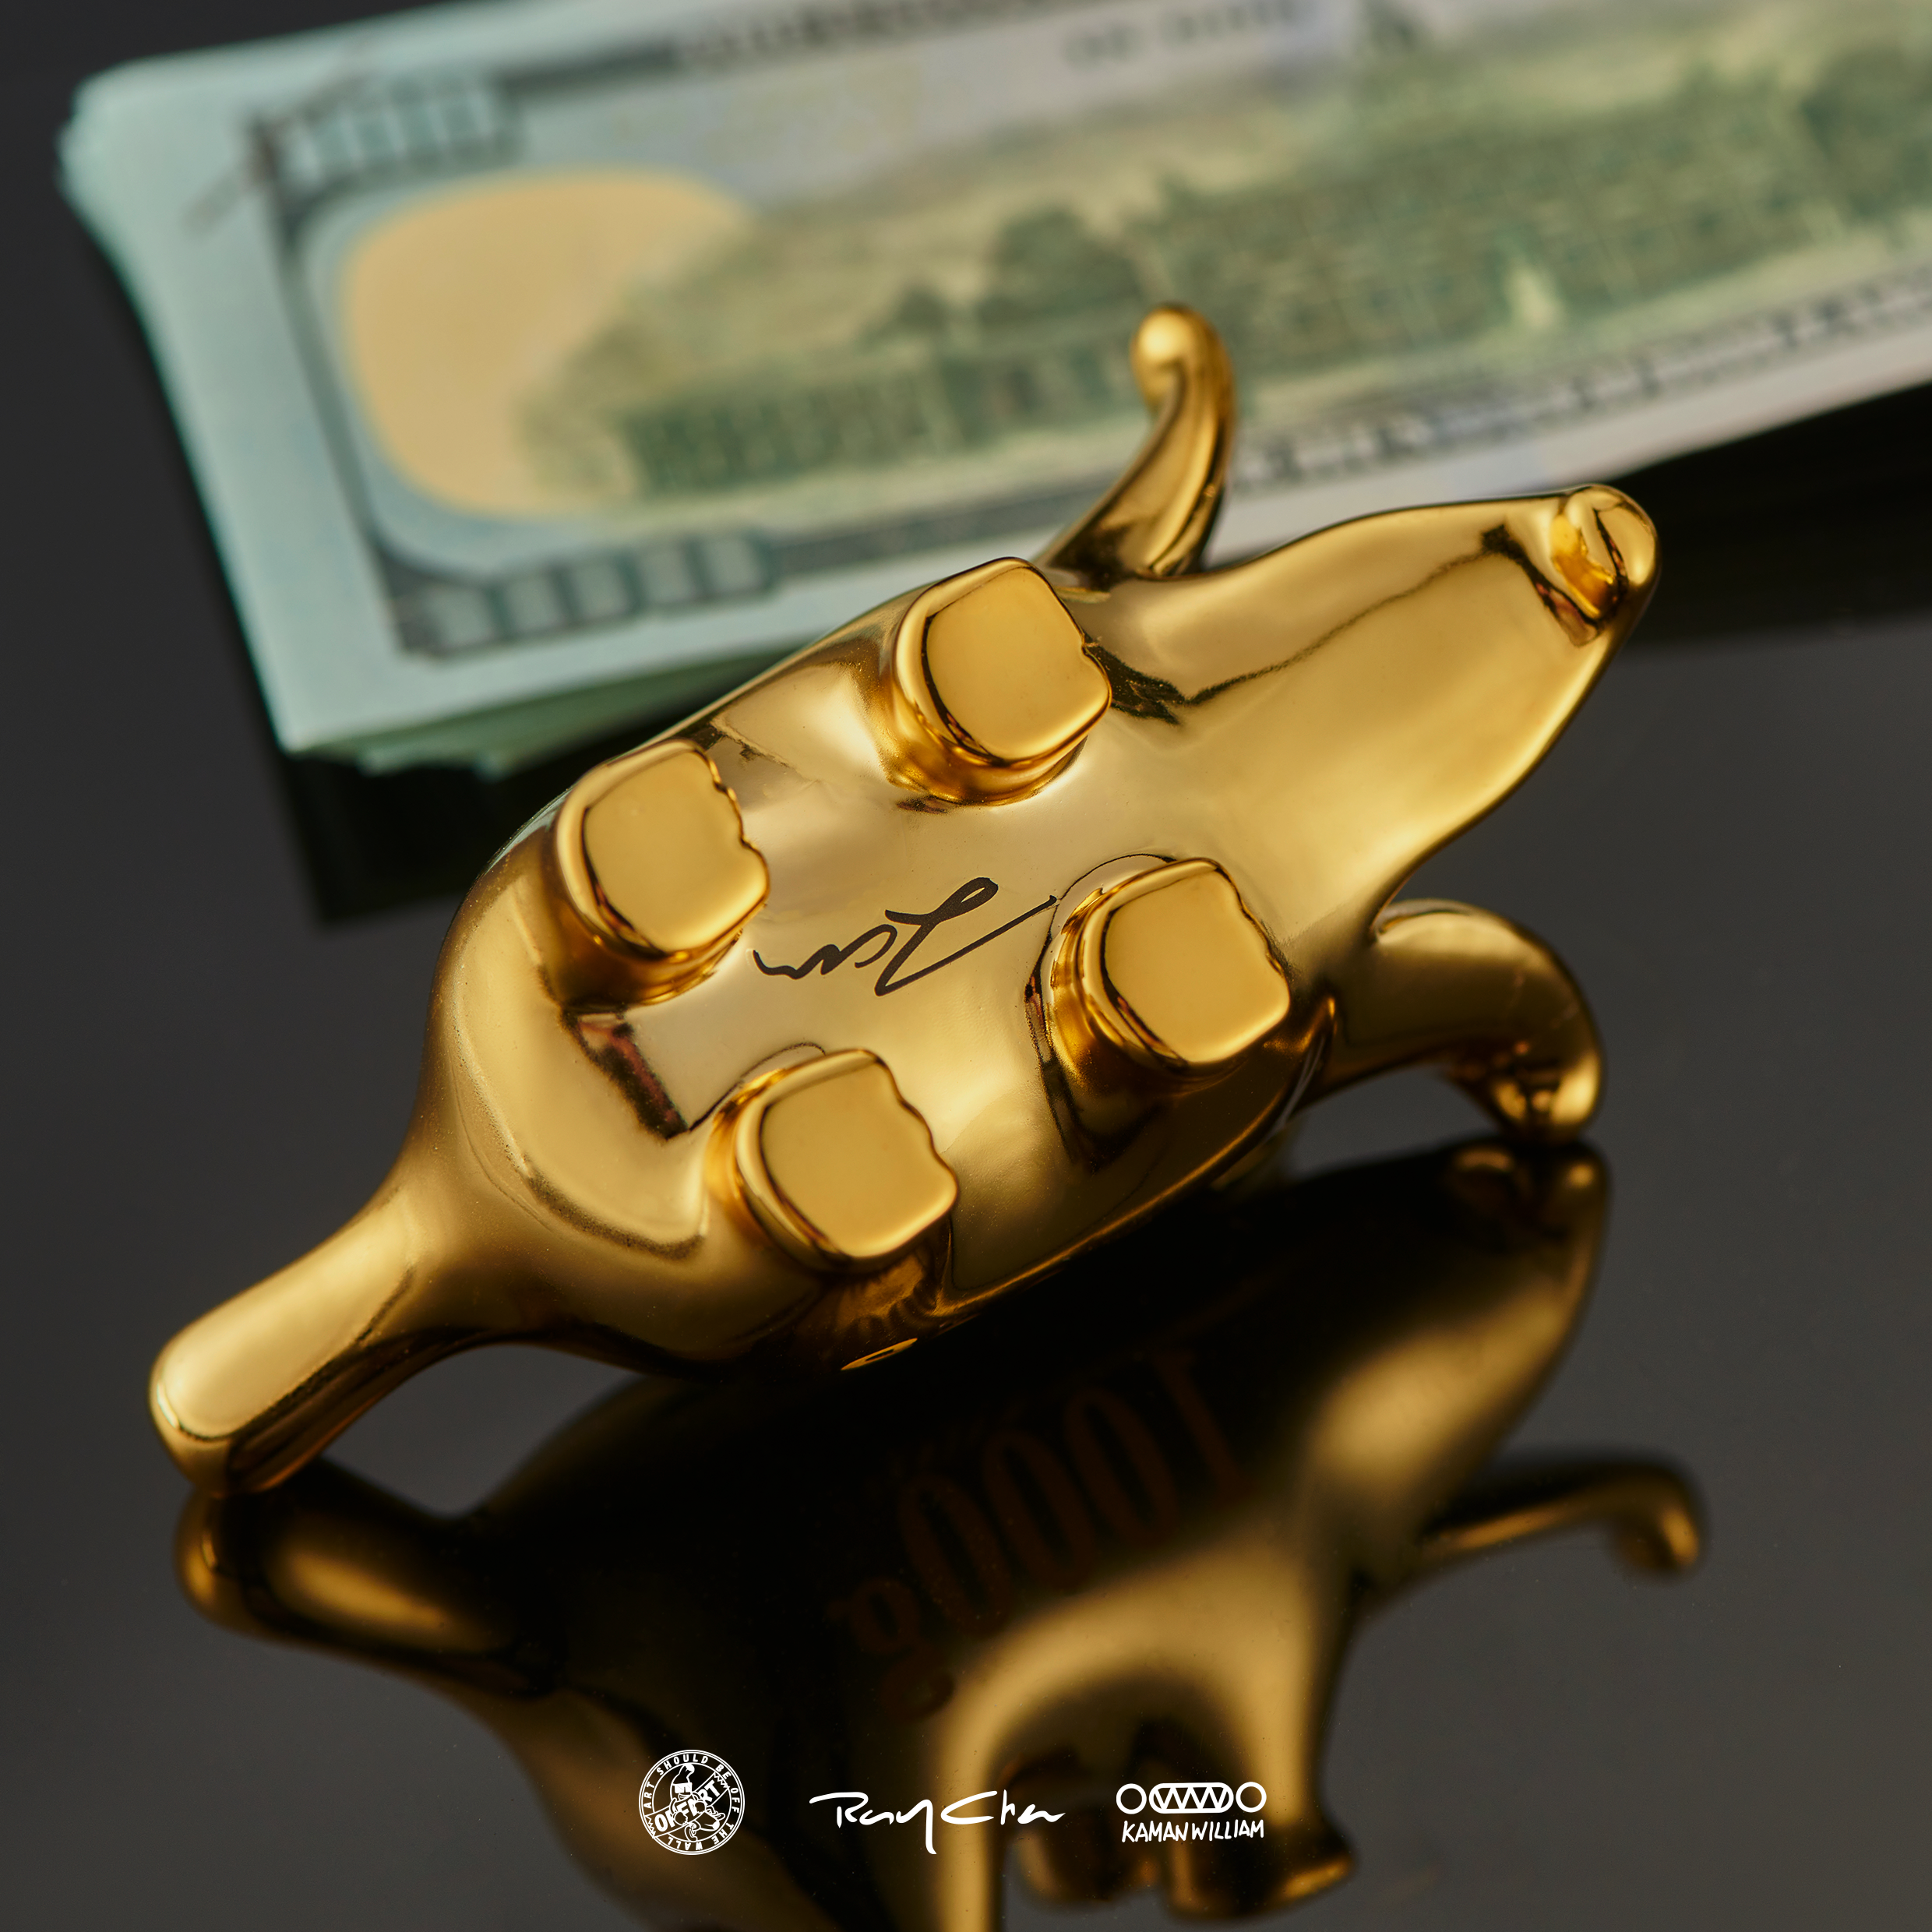 A gold pig statue with a signature, featuring a detachable banana pulp detail. OFFART X Kamanwillam Bananaer Dog Mini Gold Edition. Metal material. From Strangecat Toys, a blind box and art toy store.